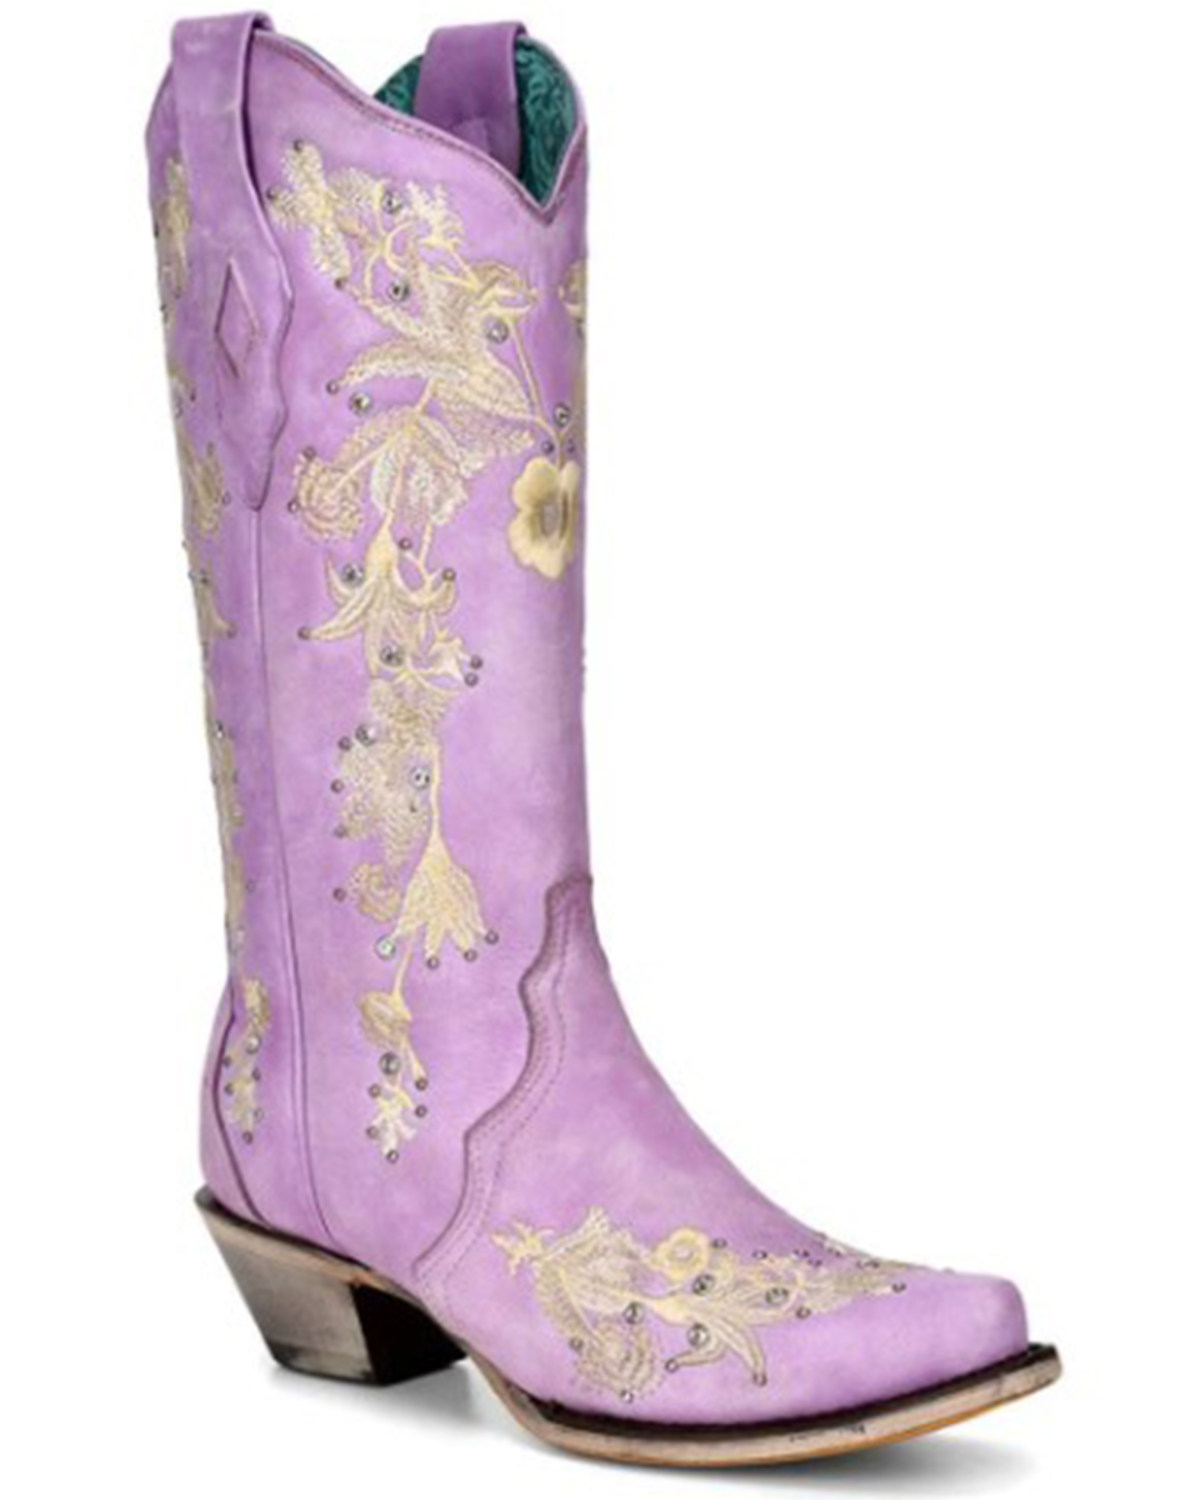 Corral Women's Embroidered Floral & Crystal Studded Tall Western Boots - Snip Toe